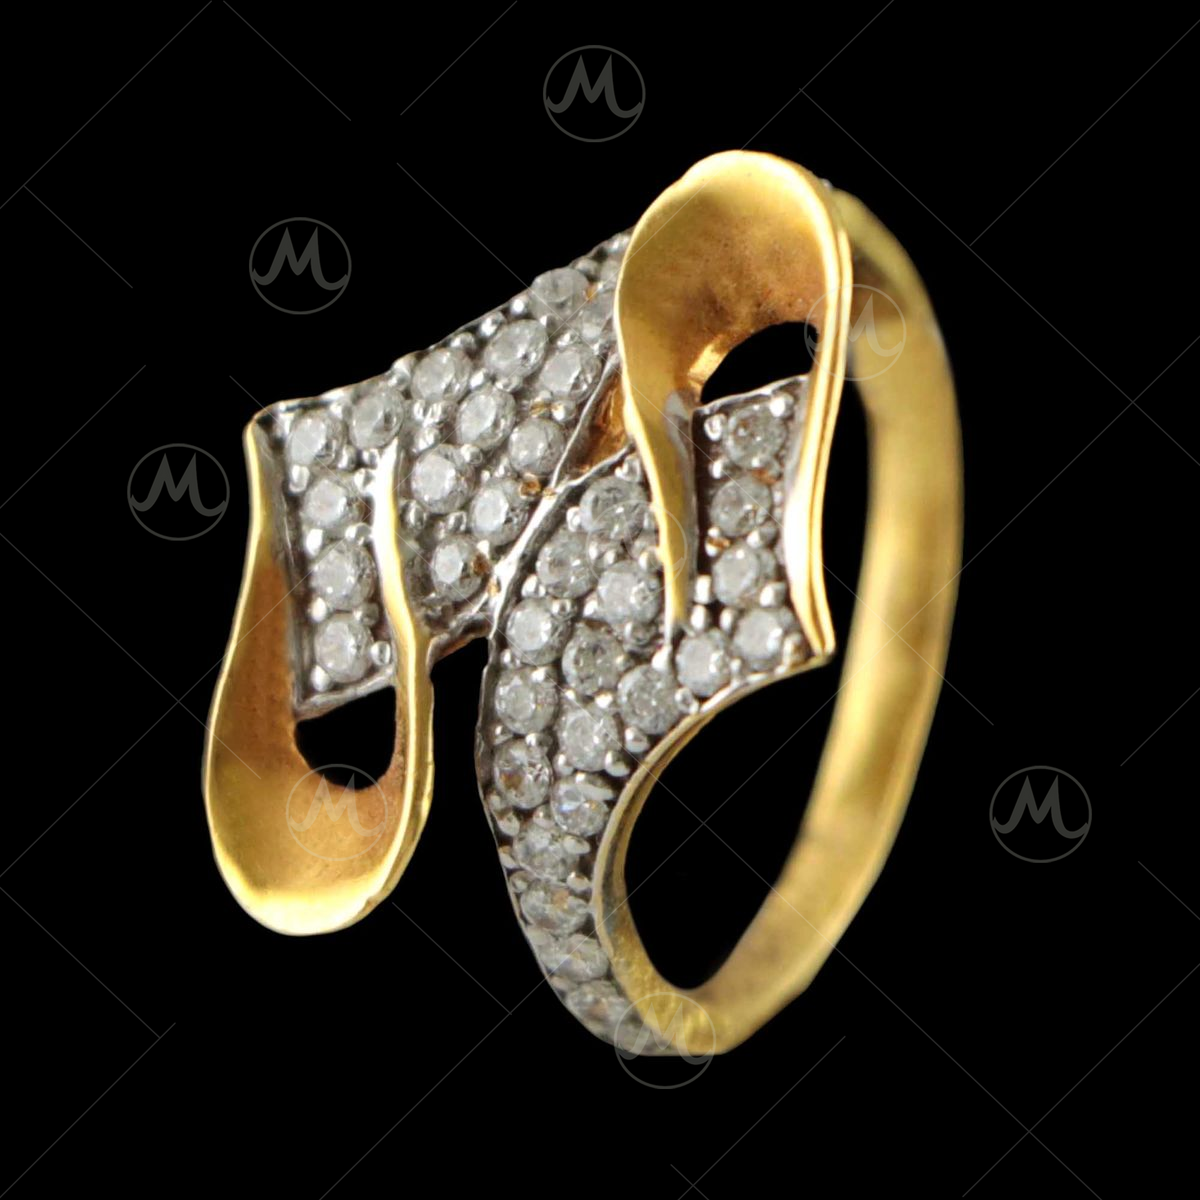 Vanki Rings - South Indian Wedding Rings in 22K Gold from Totaram Jewelers  Online Collection - YouTube